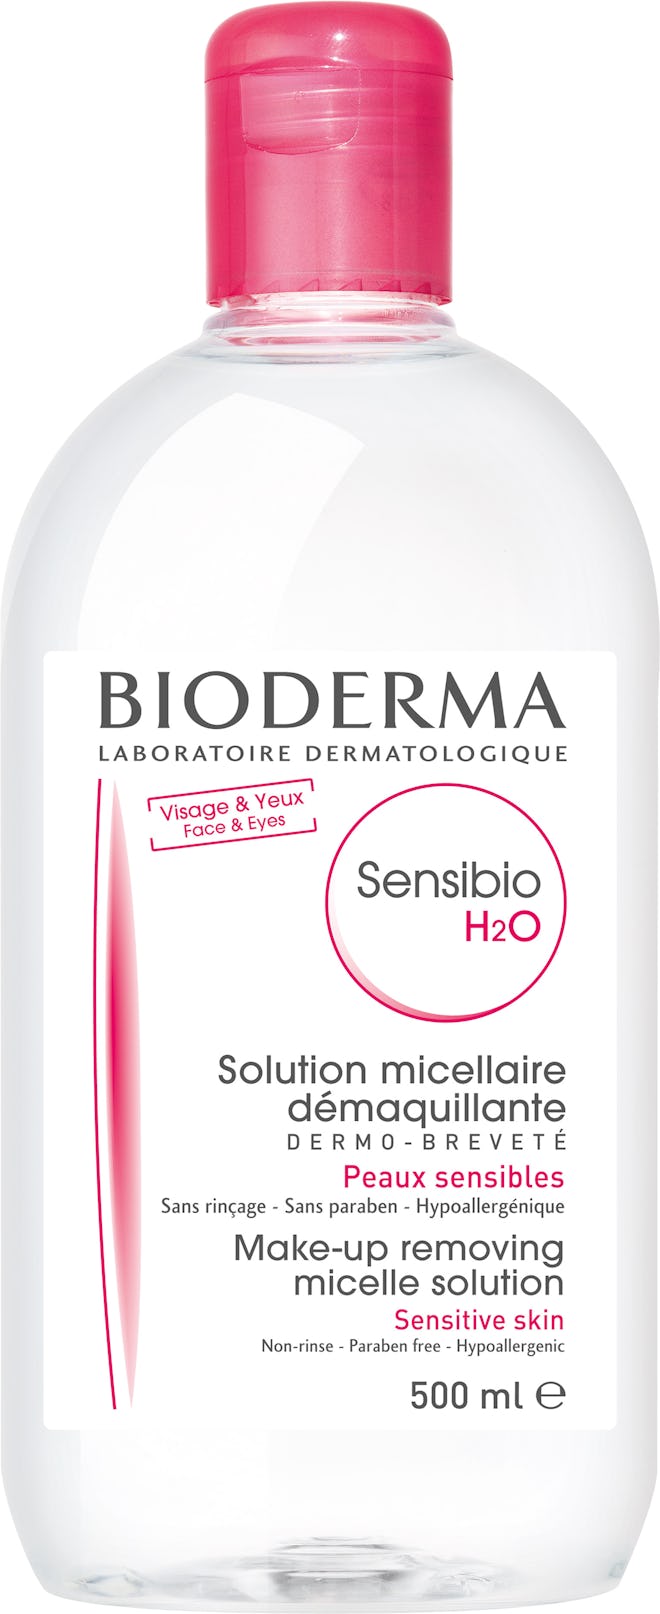 Sensibio H2O Micellar Cleansing Water and Makeup Remover Solution for Face and Eyes